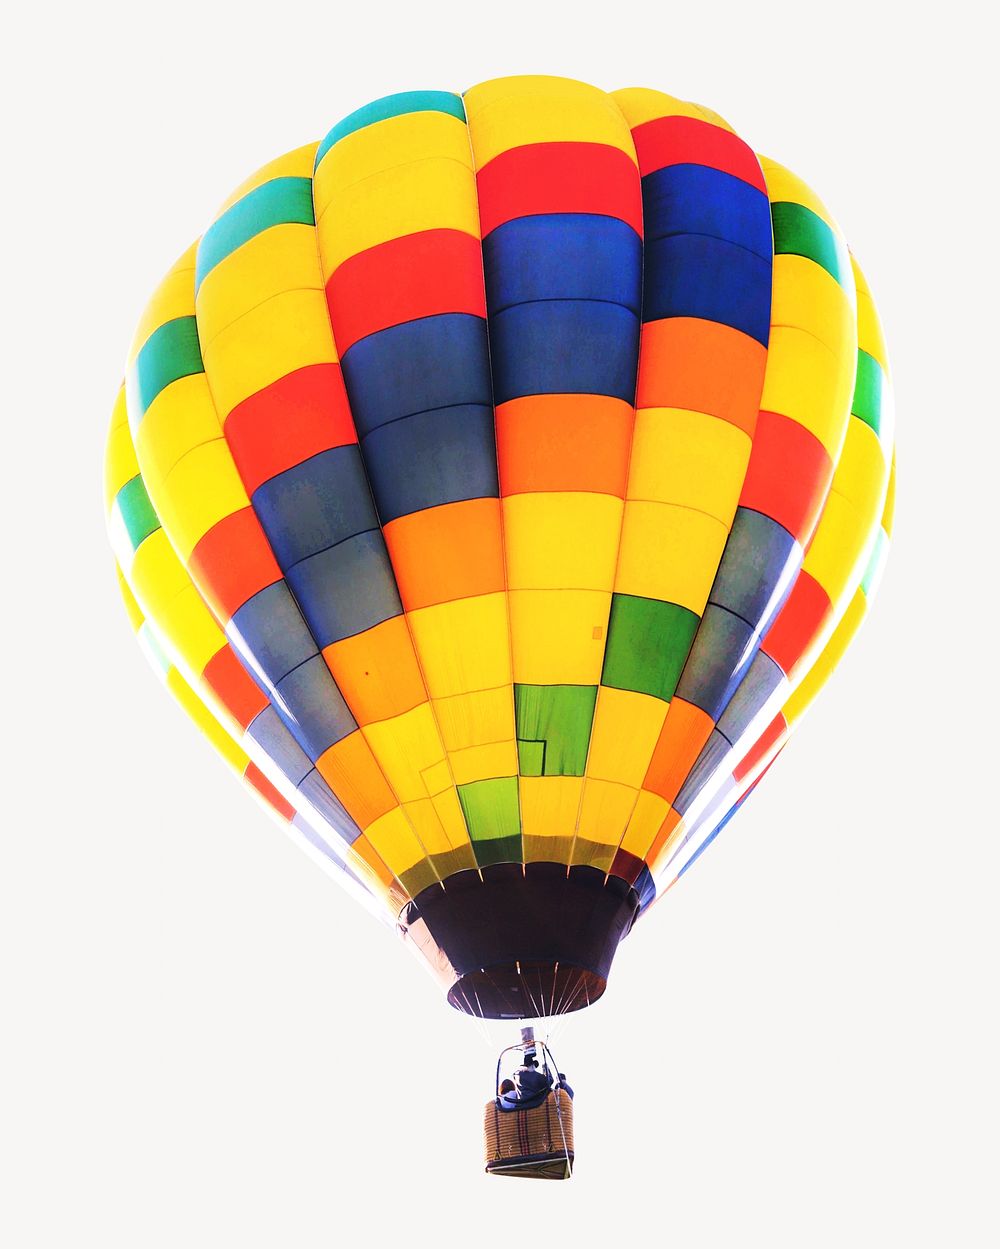 Colorful hot air balloon, isolated object